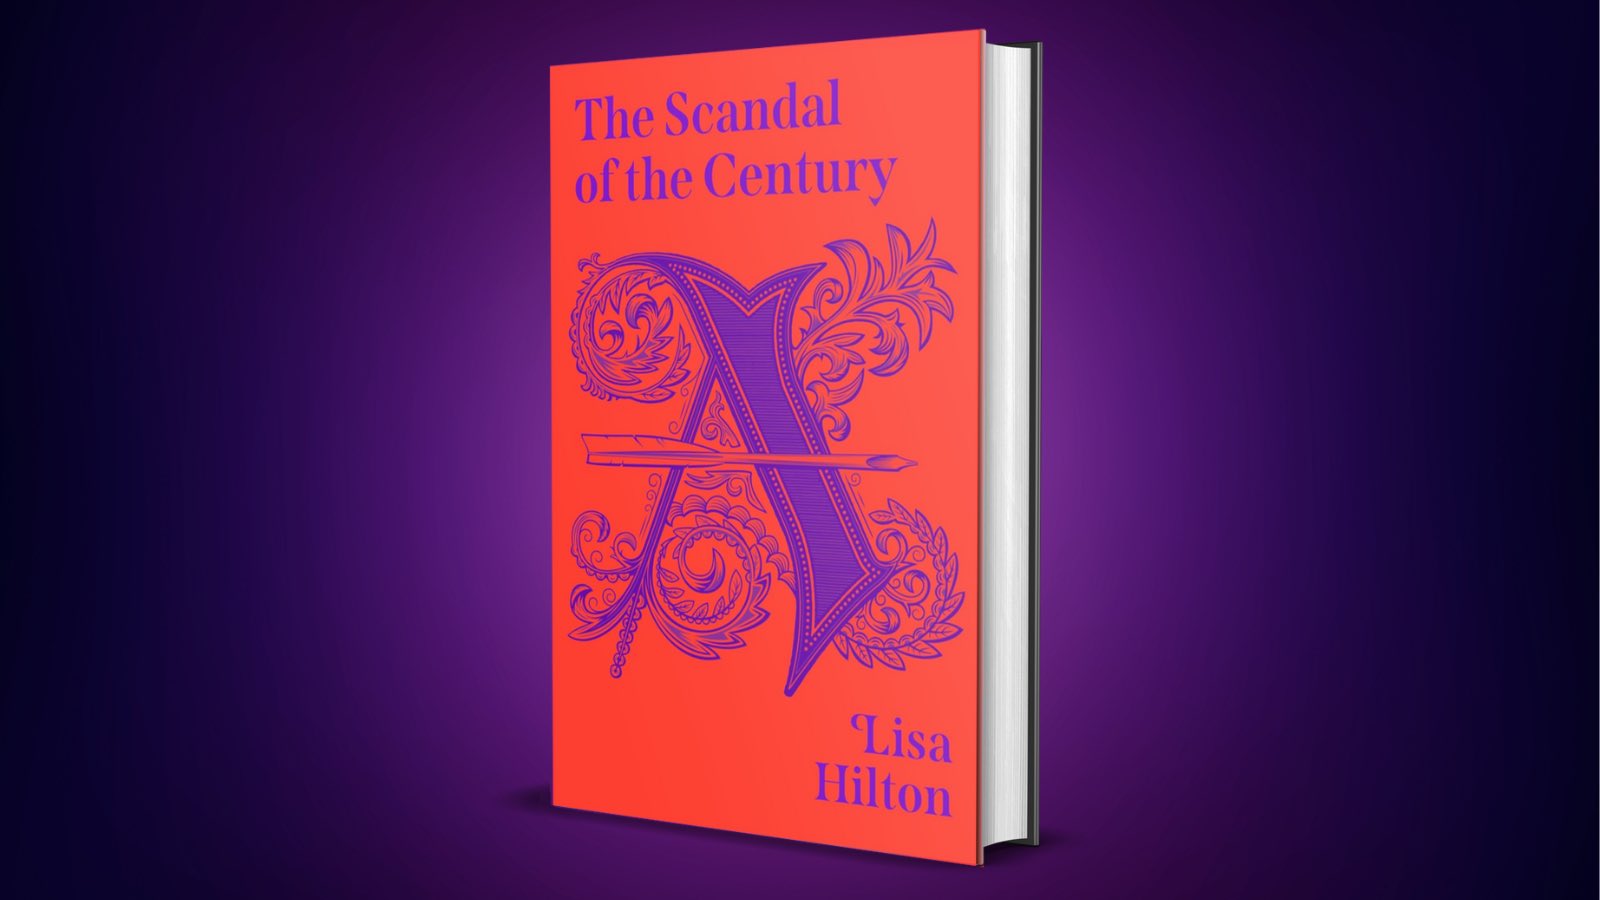 The Scandal of the Century, Lisa Hilton, book cover design by Jamie Clarke Type